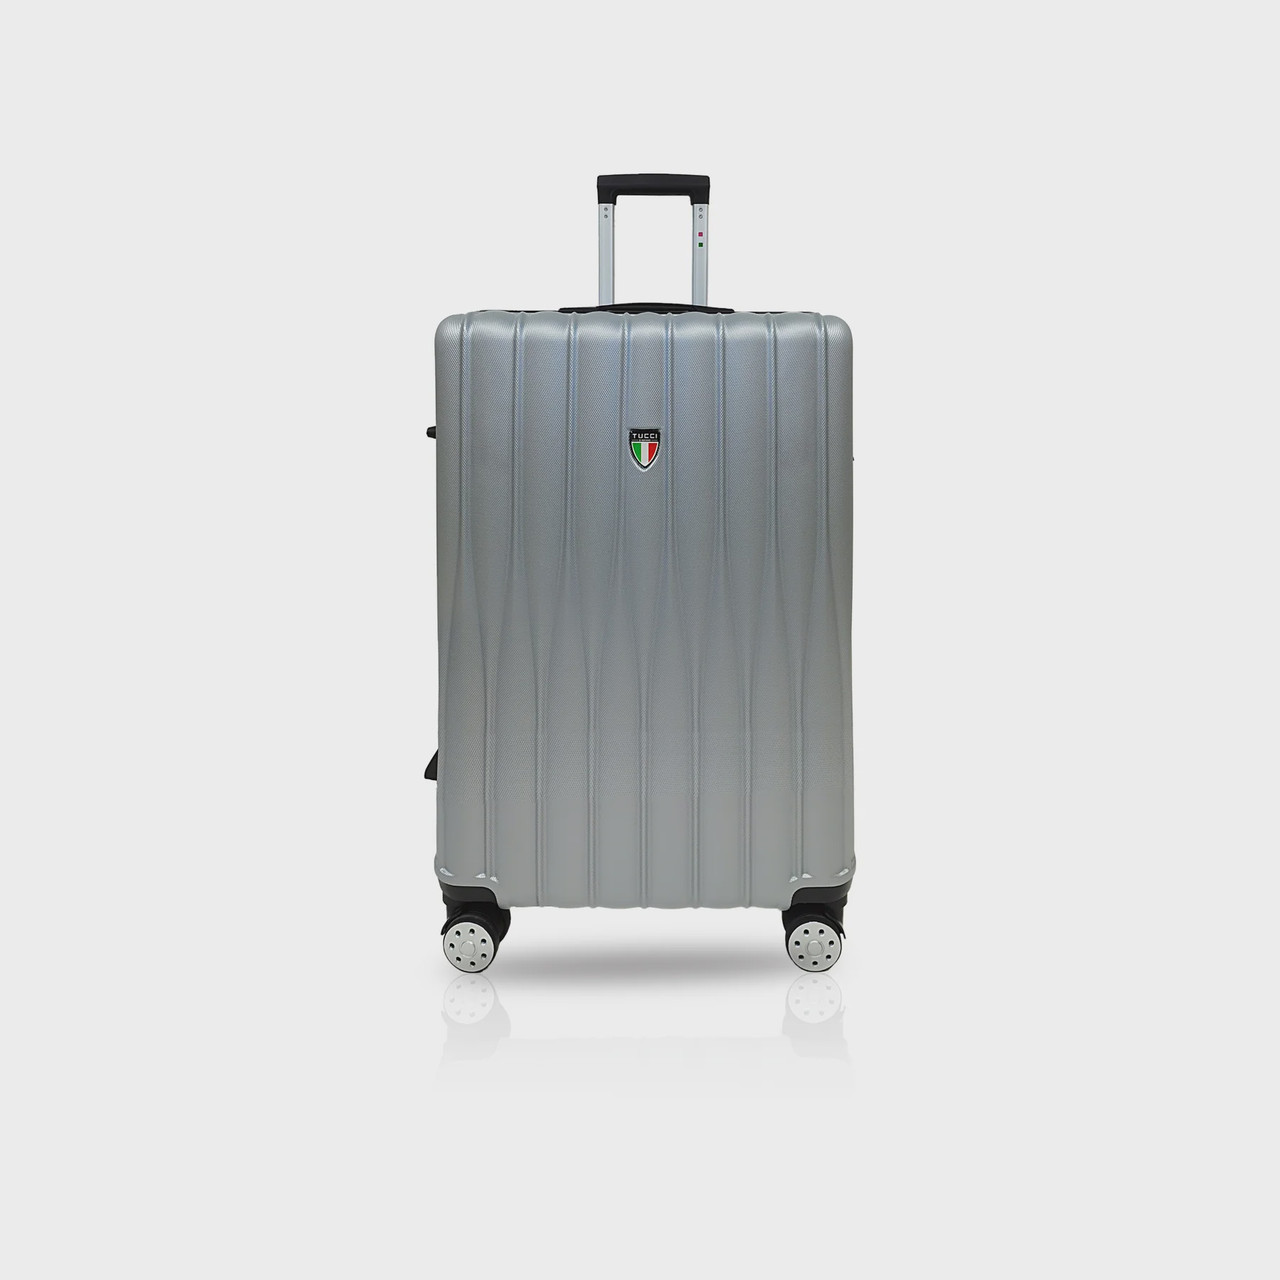 LUGGAGE SUITCASE TUCCI Italy LARGE 28" BARATRO T0331-28IN-SILWT ABS HARD  COVER 4 WHEEL SPINNER SILVER WHITE - A. Ally & Sons